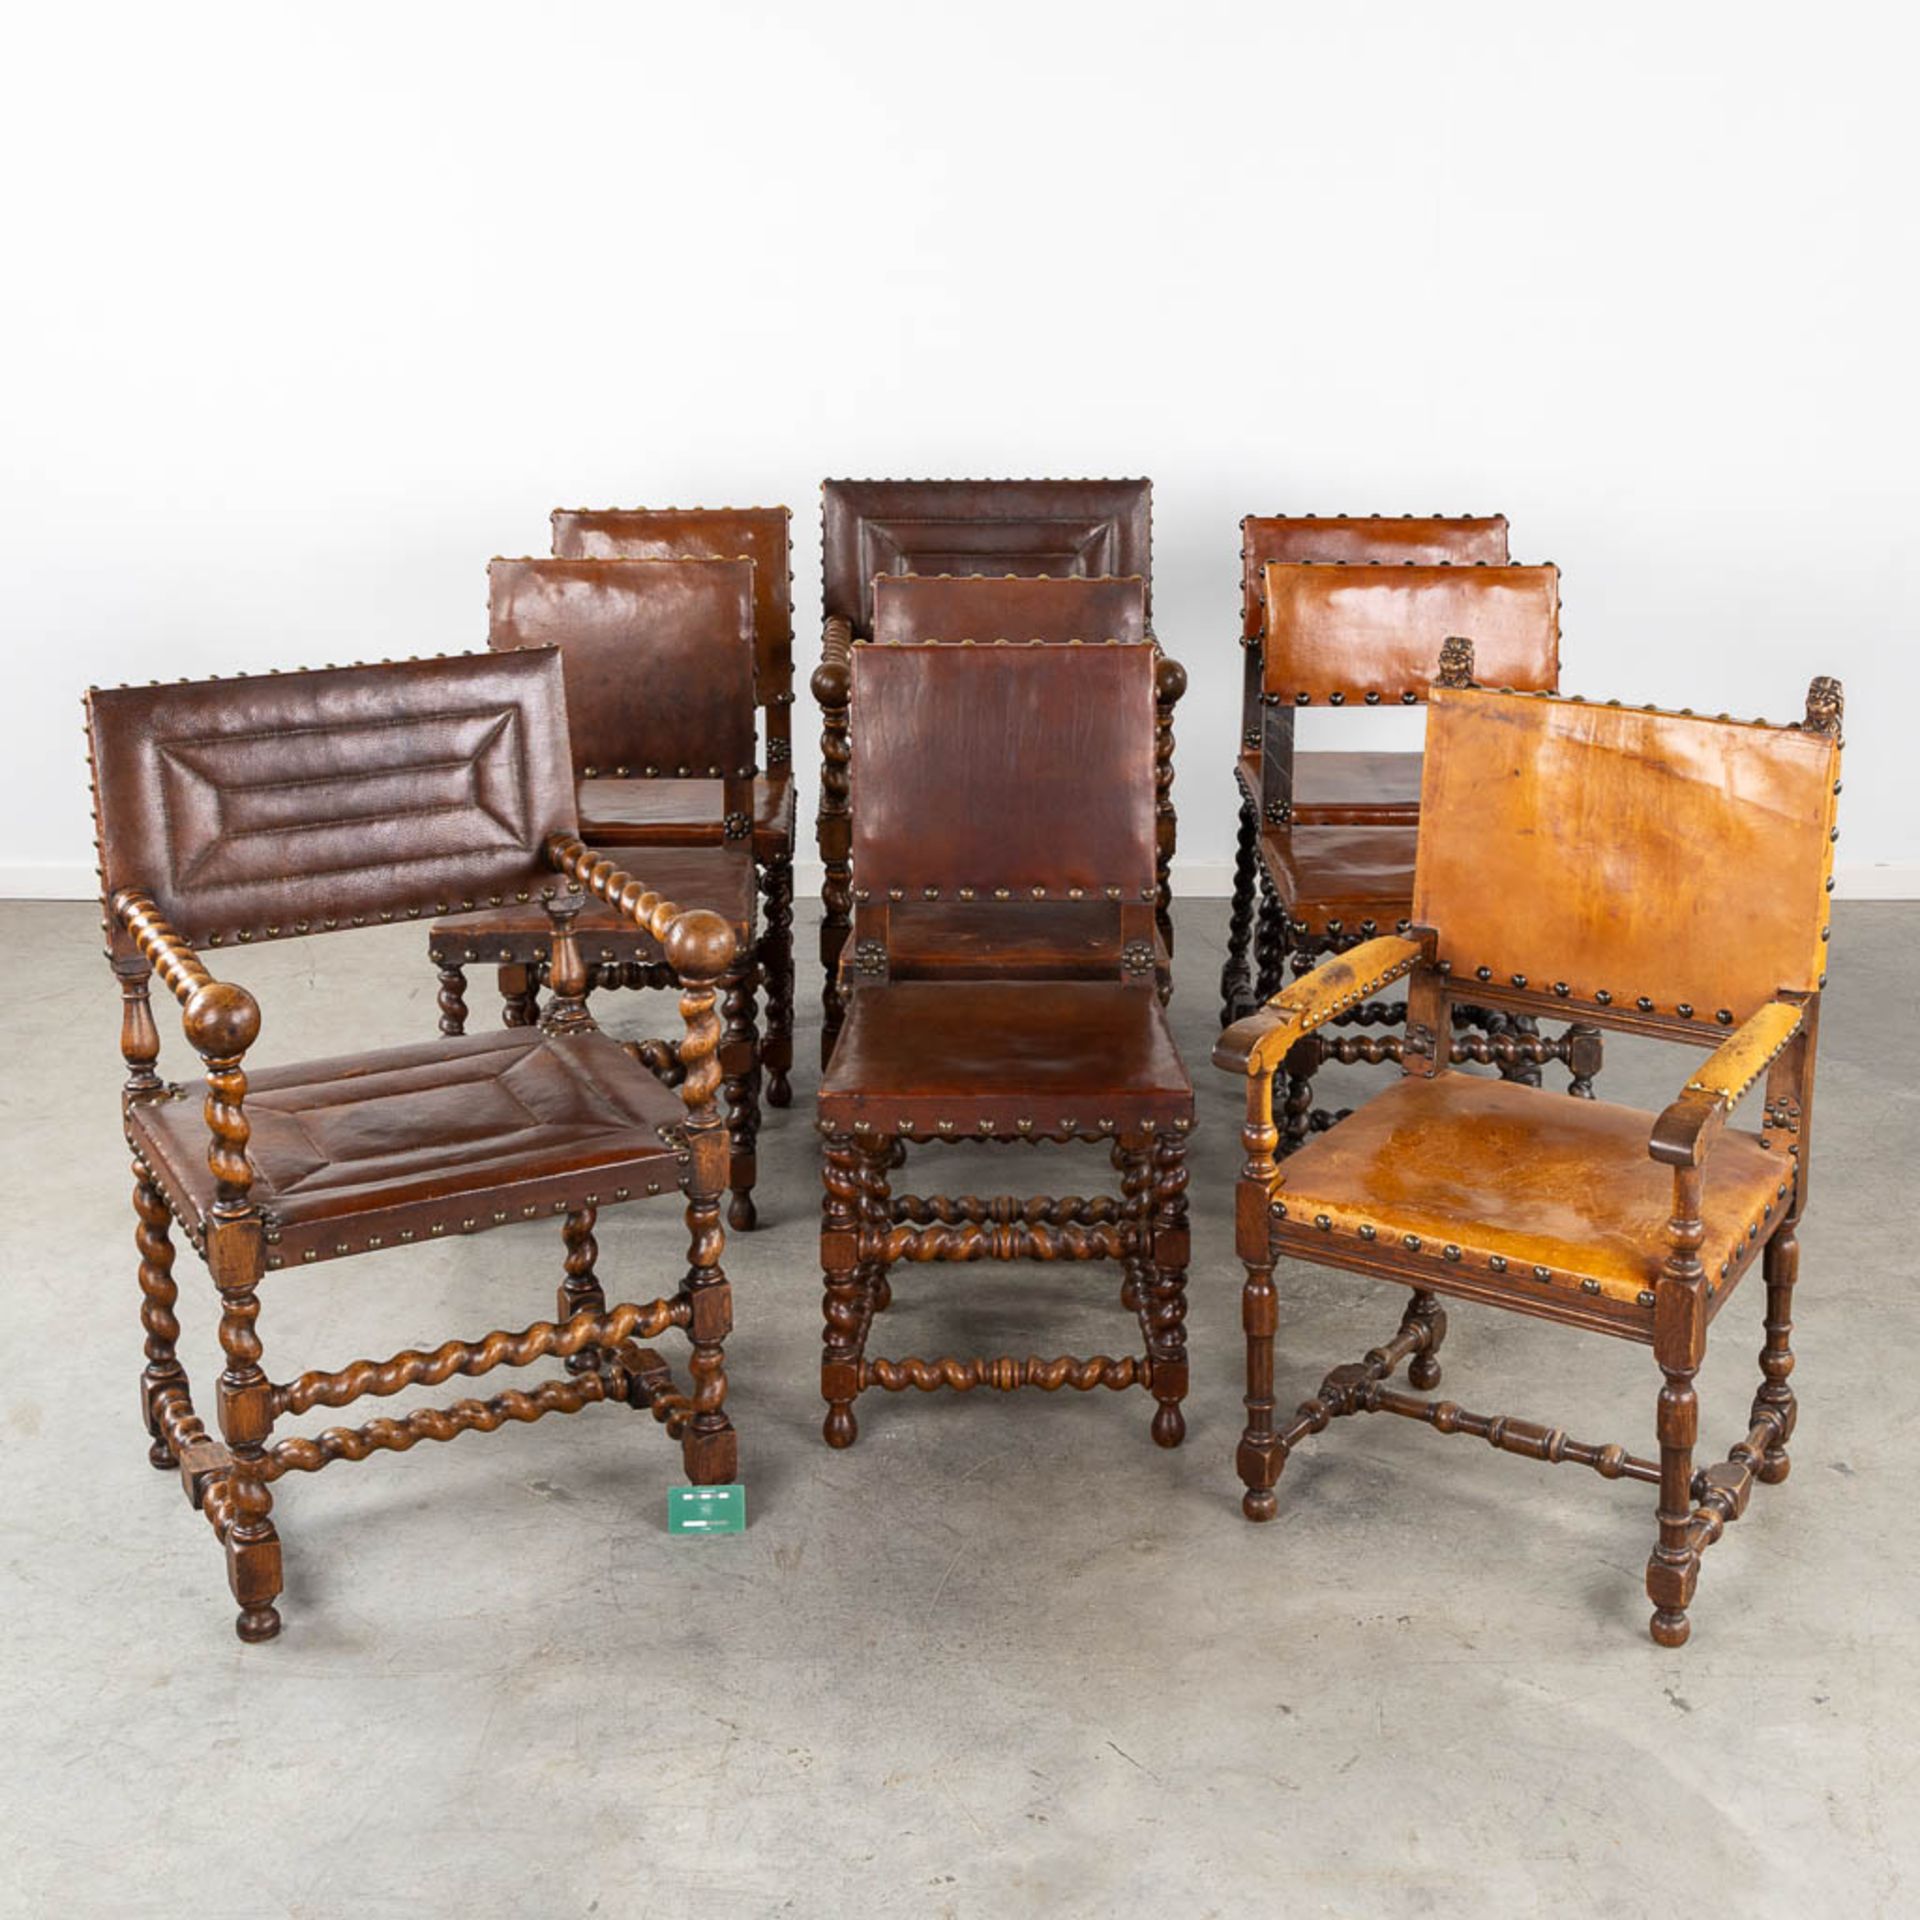 An assembled collection of chairs and armchairs, wood and leather. 9 pieces. (L:56 x W:59 x H:94 cm) - Bild 2 aus 21